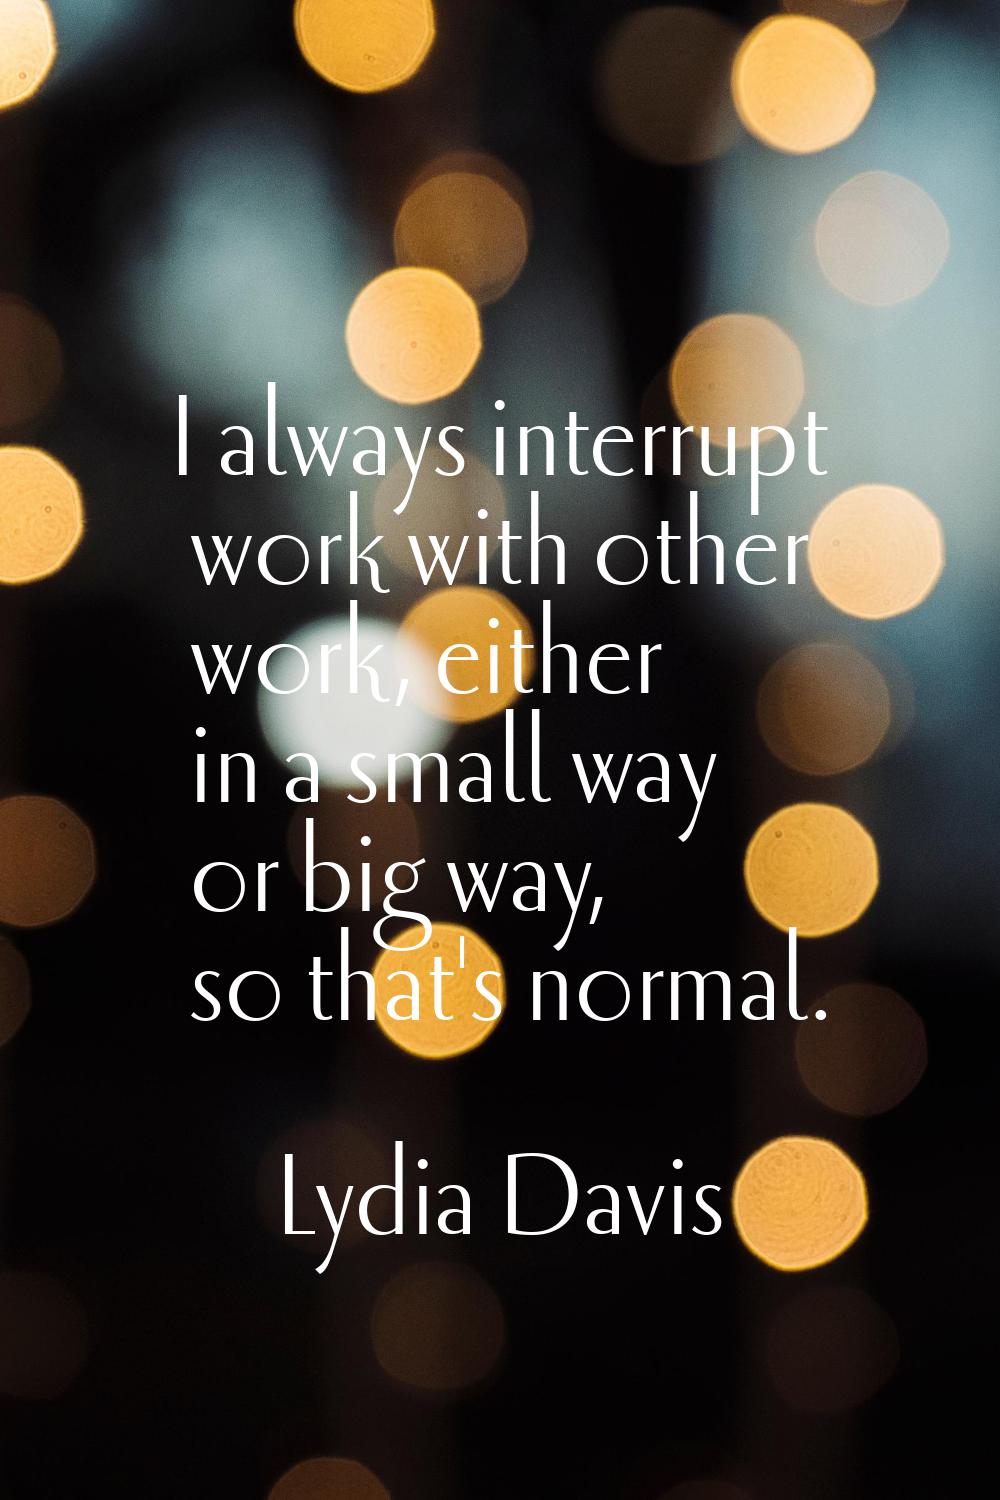 I always interrupt work with other work, either in a small way or big way, so that's normal.